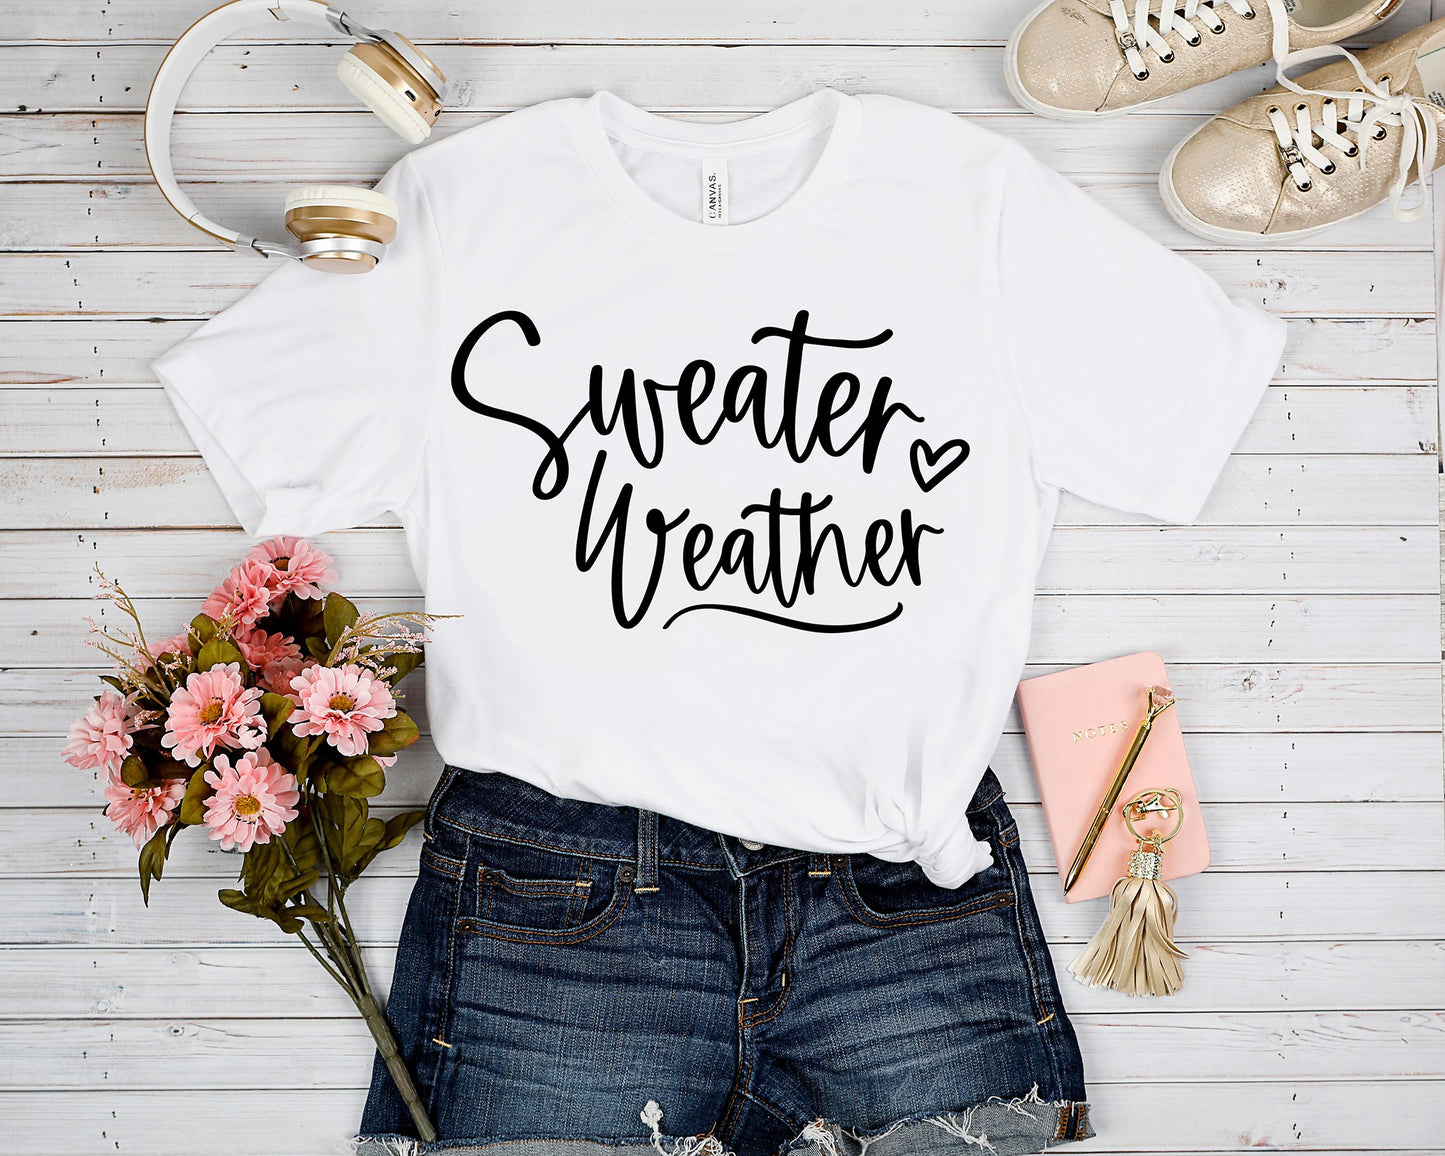 OUTFIT 6-SWEATER WEATHER TEE